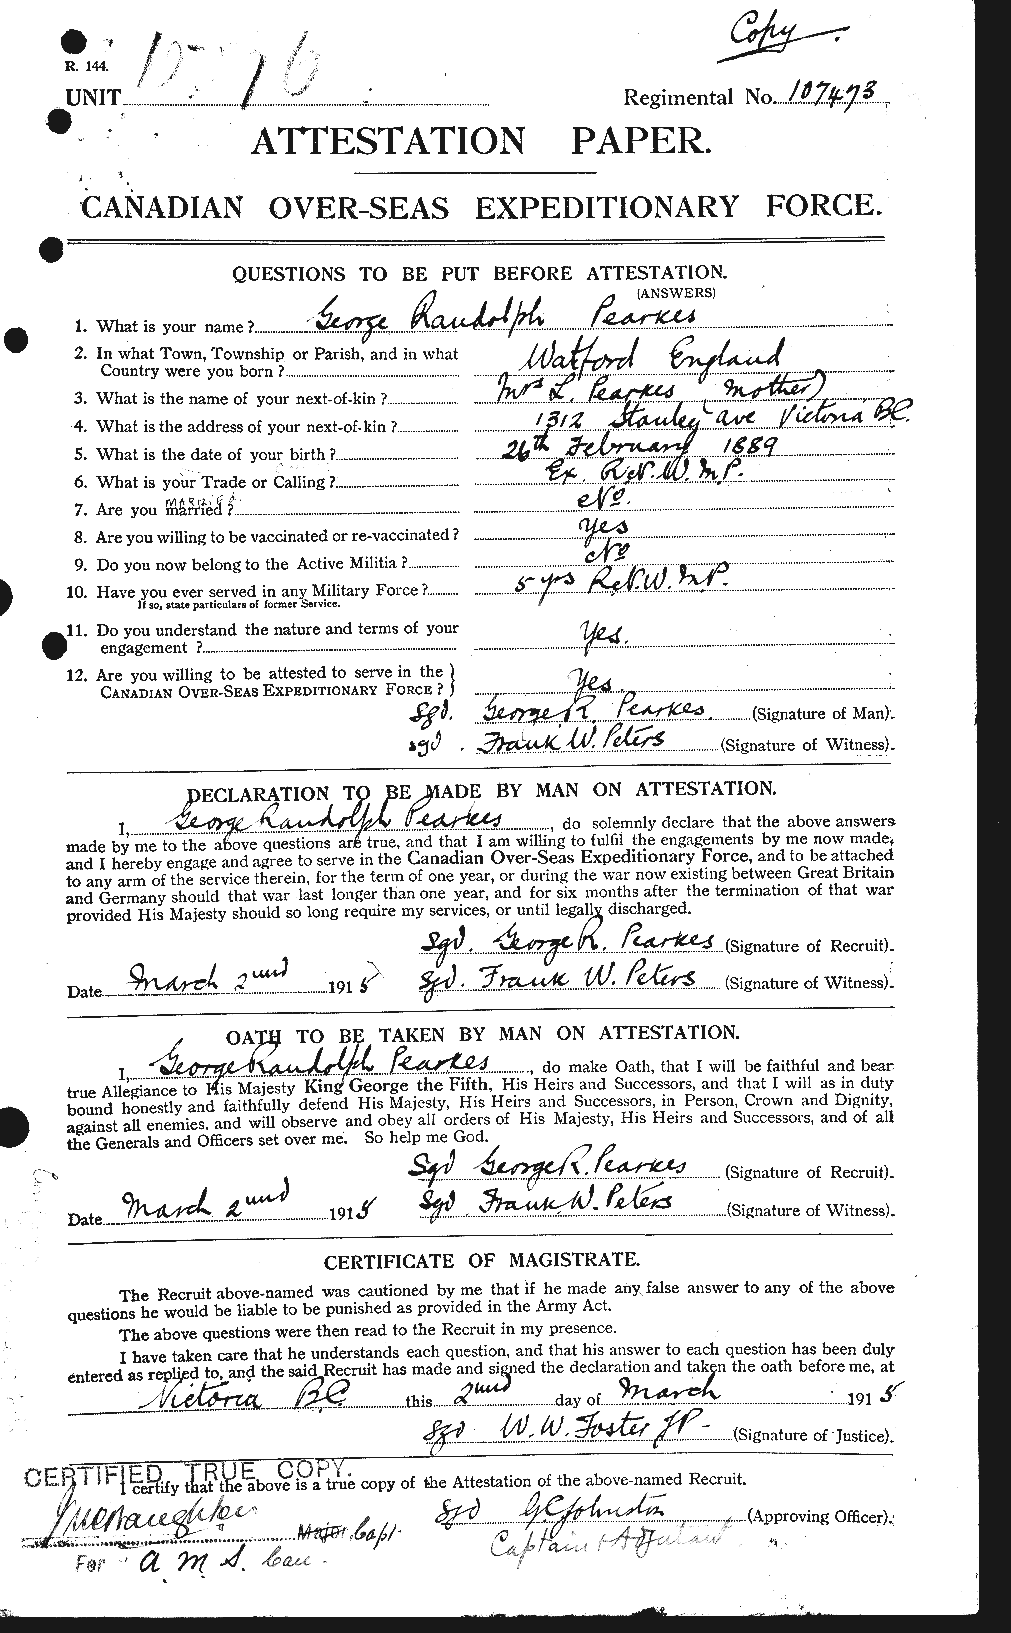 Personnel Records of the First World War - CEF 200673a